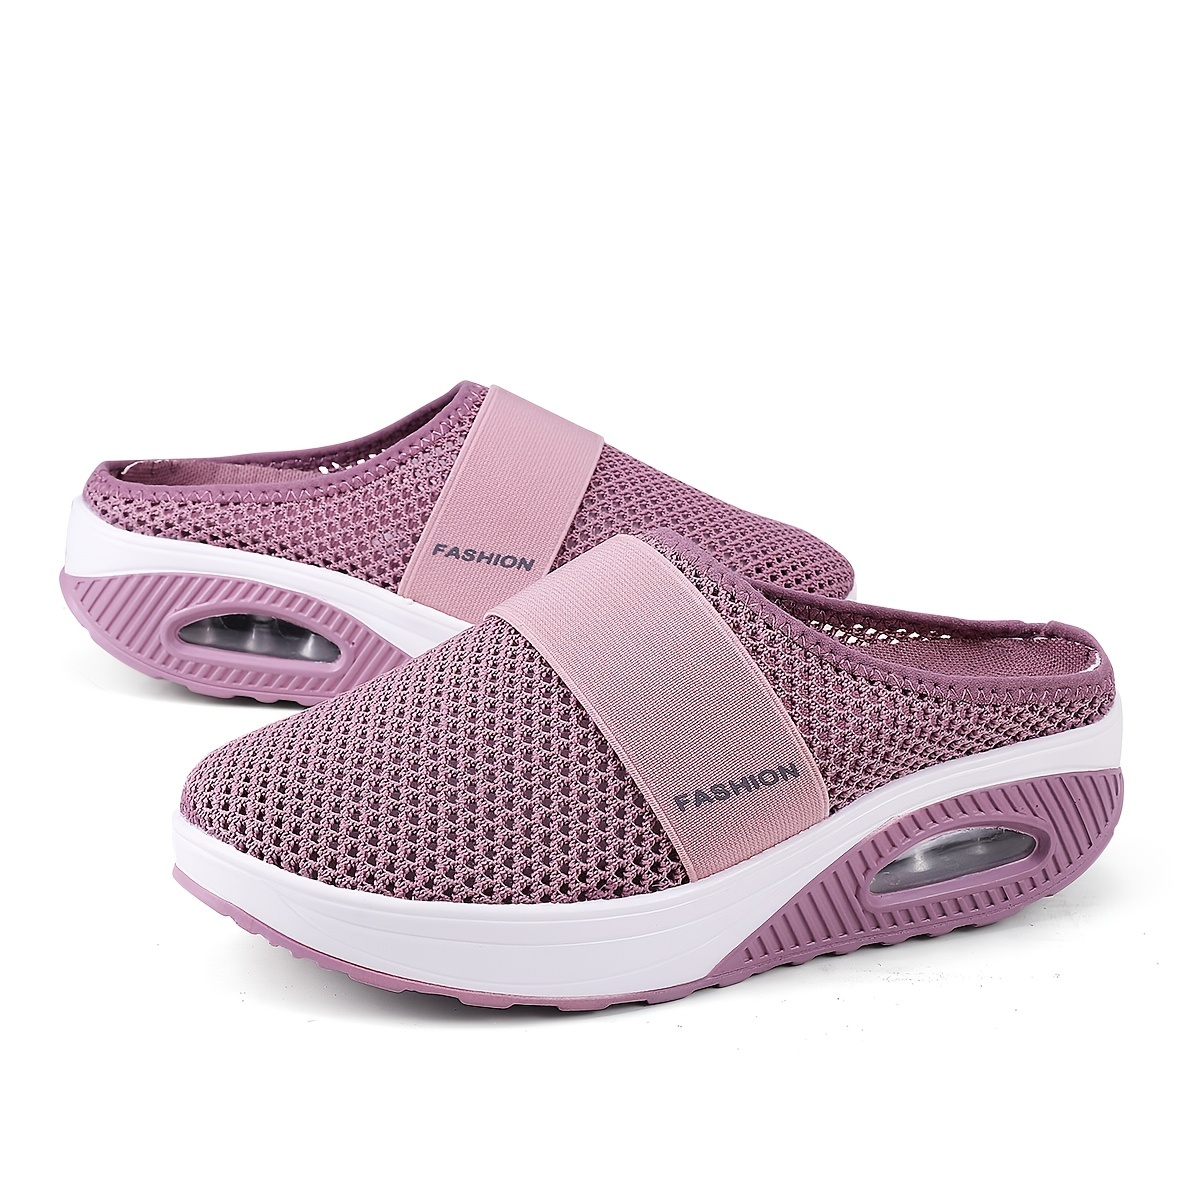 woven mesh sandals women s flying casual air cushion sole